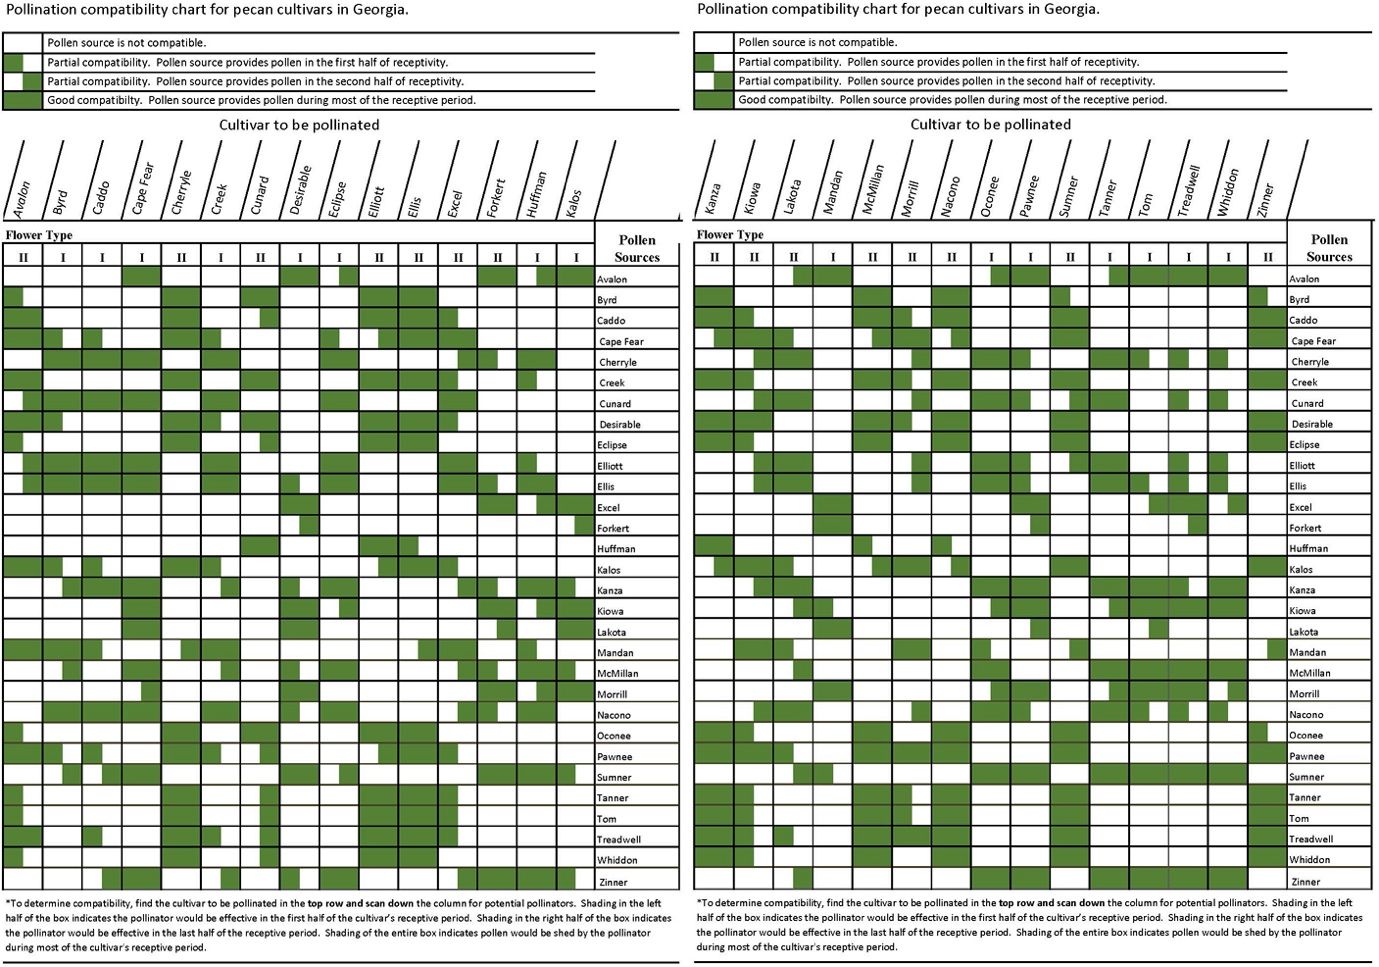 Pollination compatibility chart for pecan cultivars in Georgia.